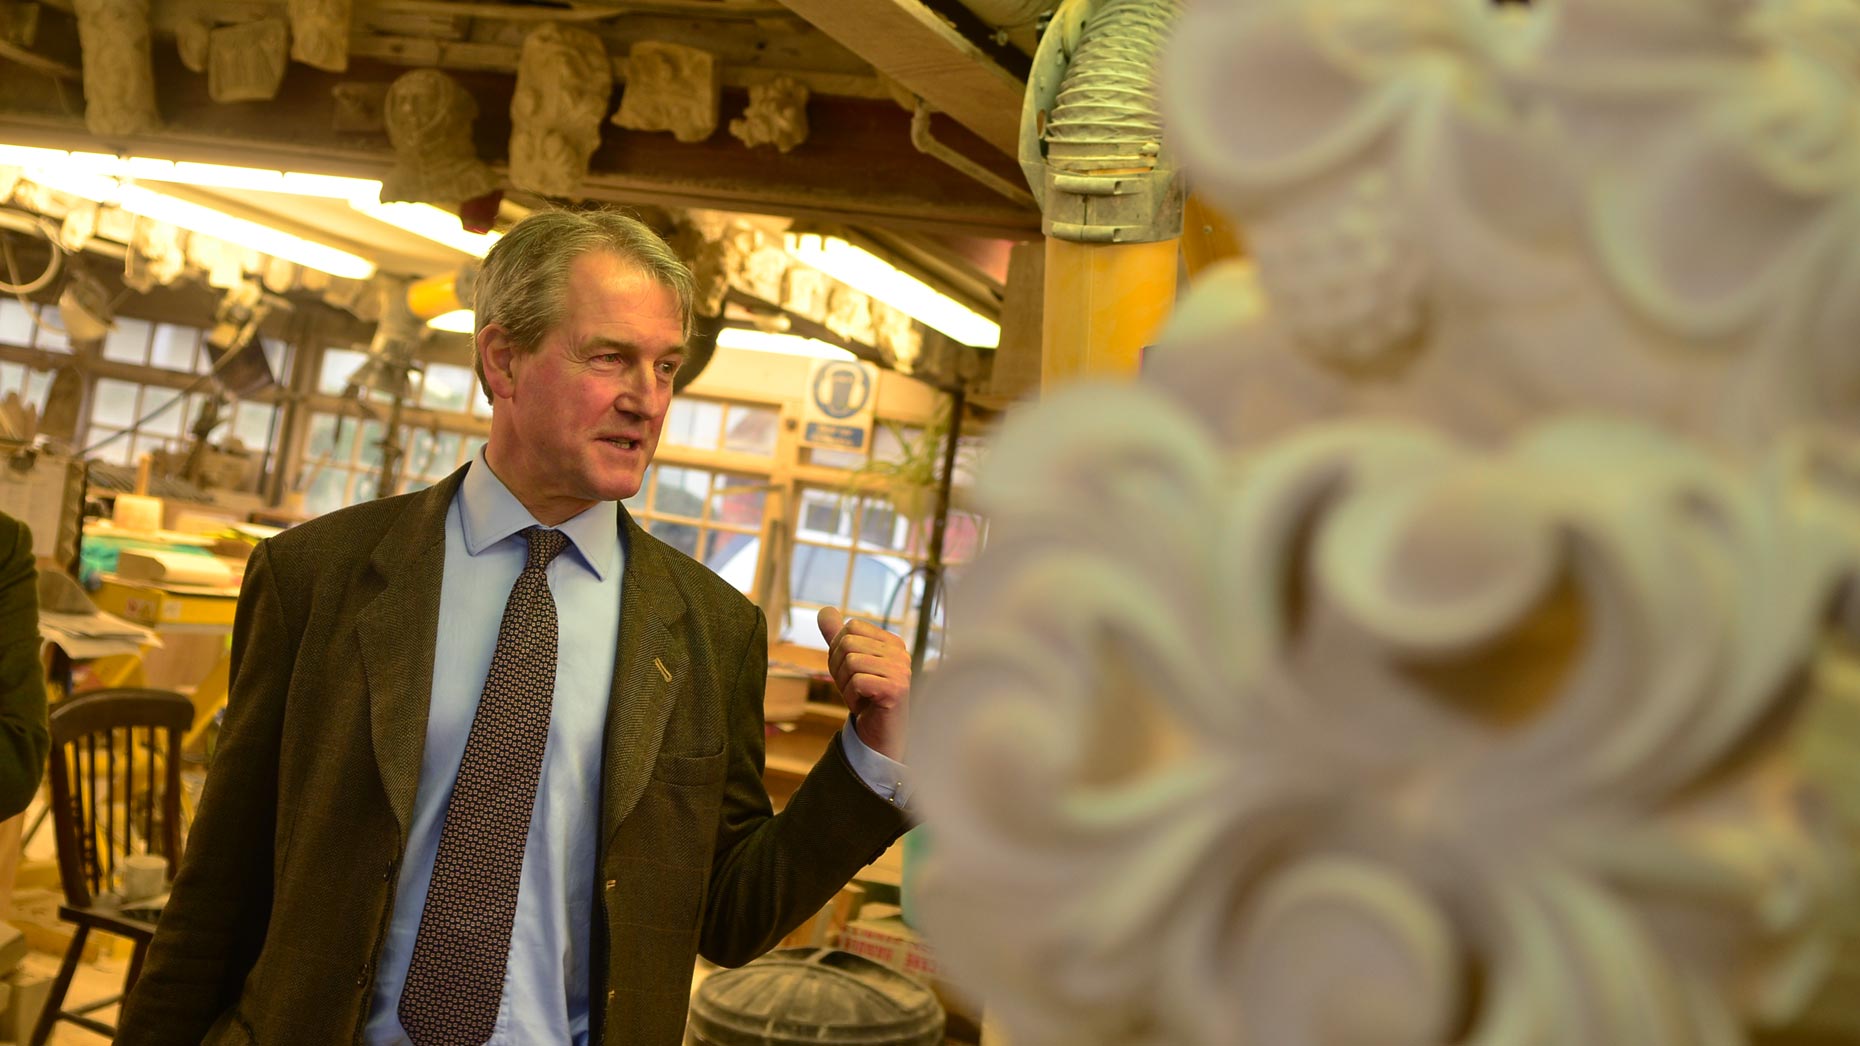 Owen Paterson in Lincoln on March 31, 2014. Photo: Steve Smailes for The Lincolnite